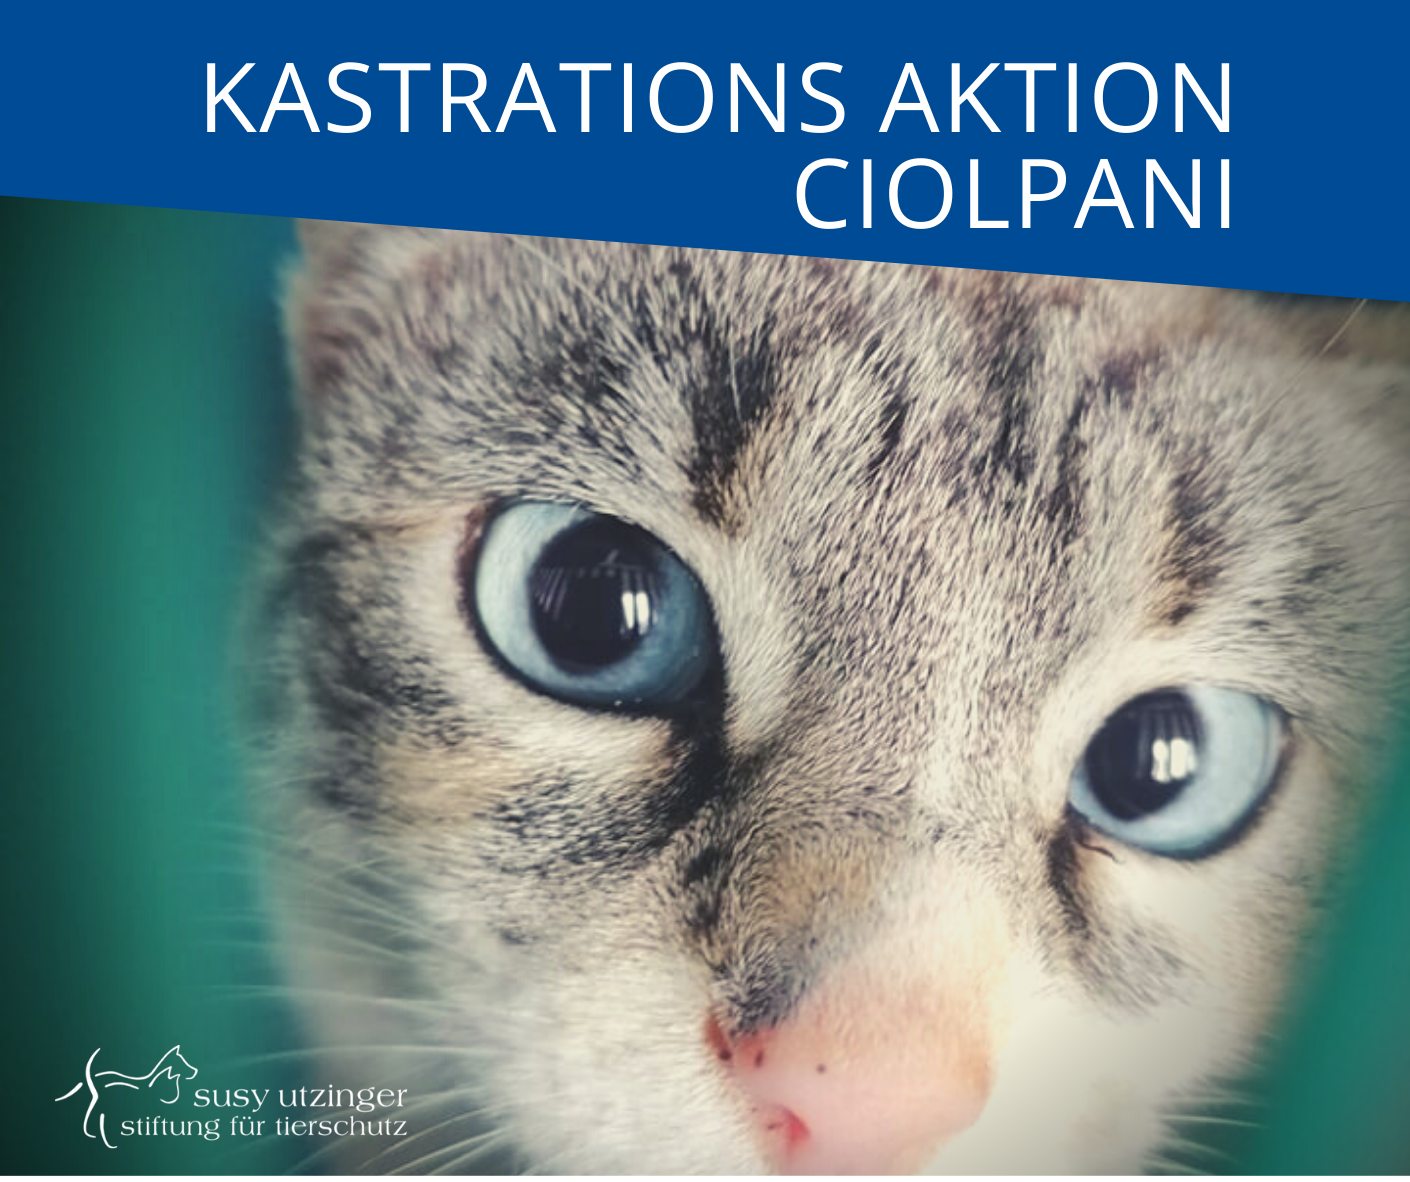 ++ Campaign report from our castration action in Ciolpani, Romania ++